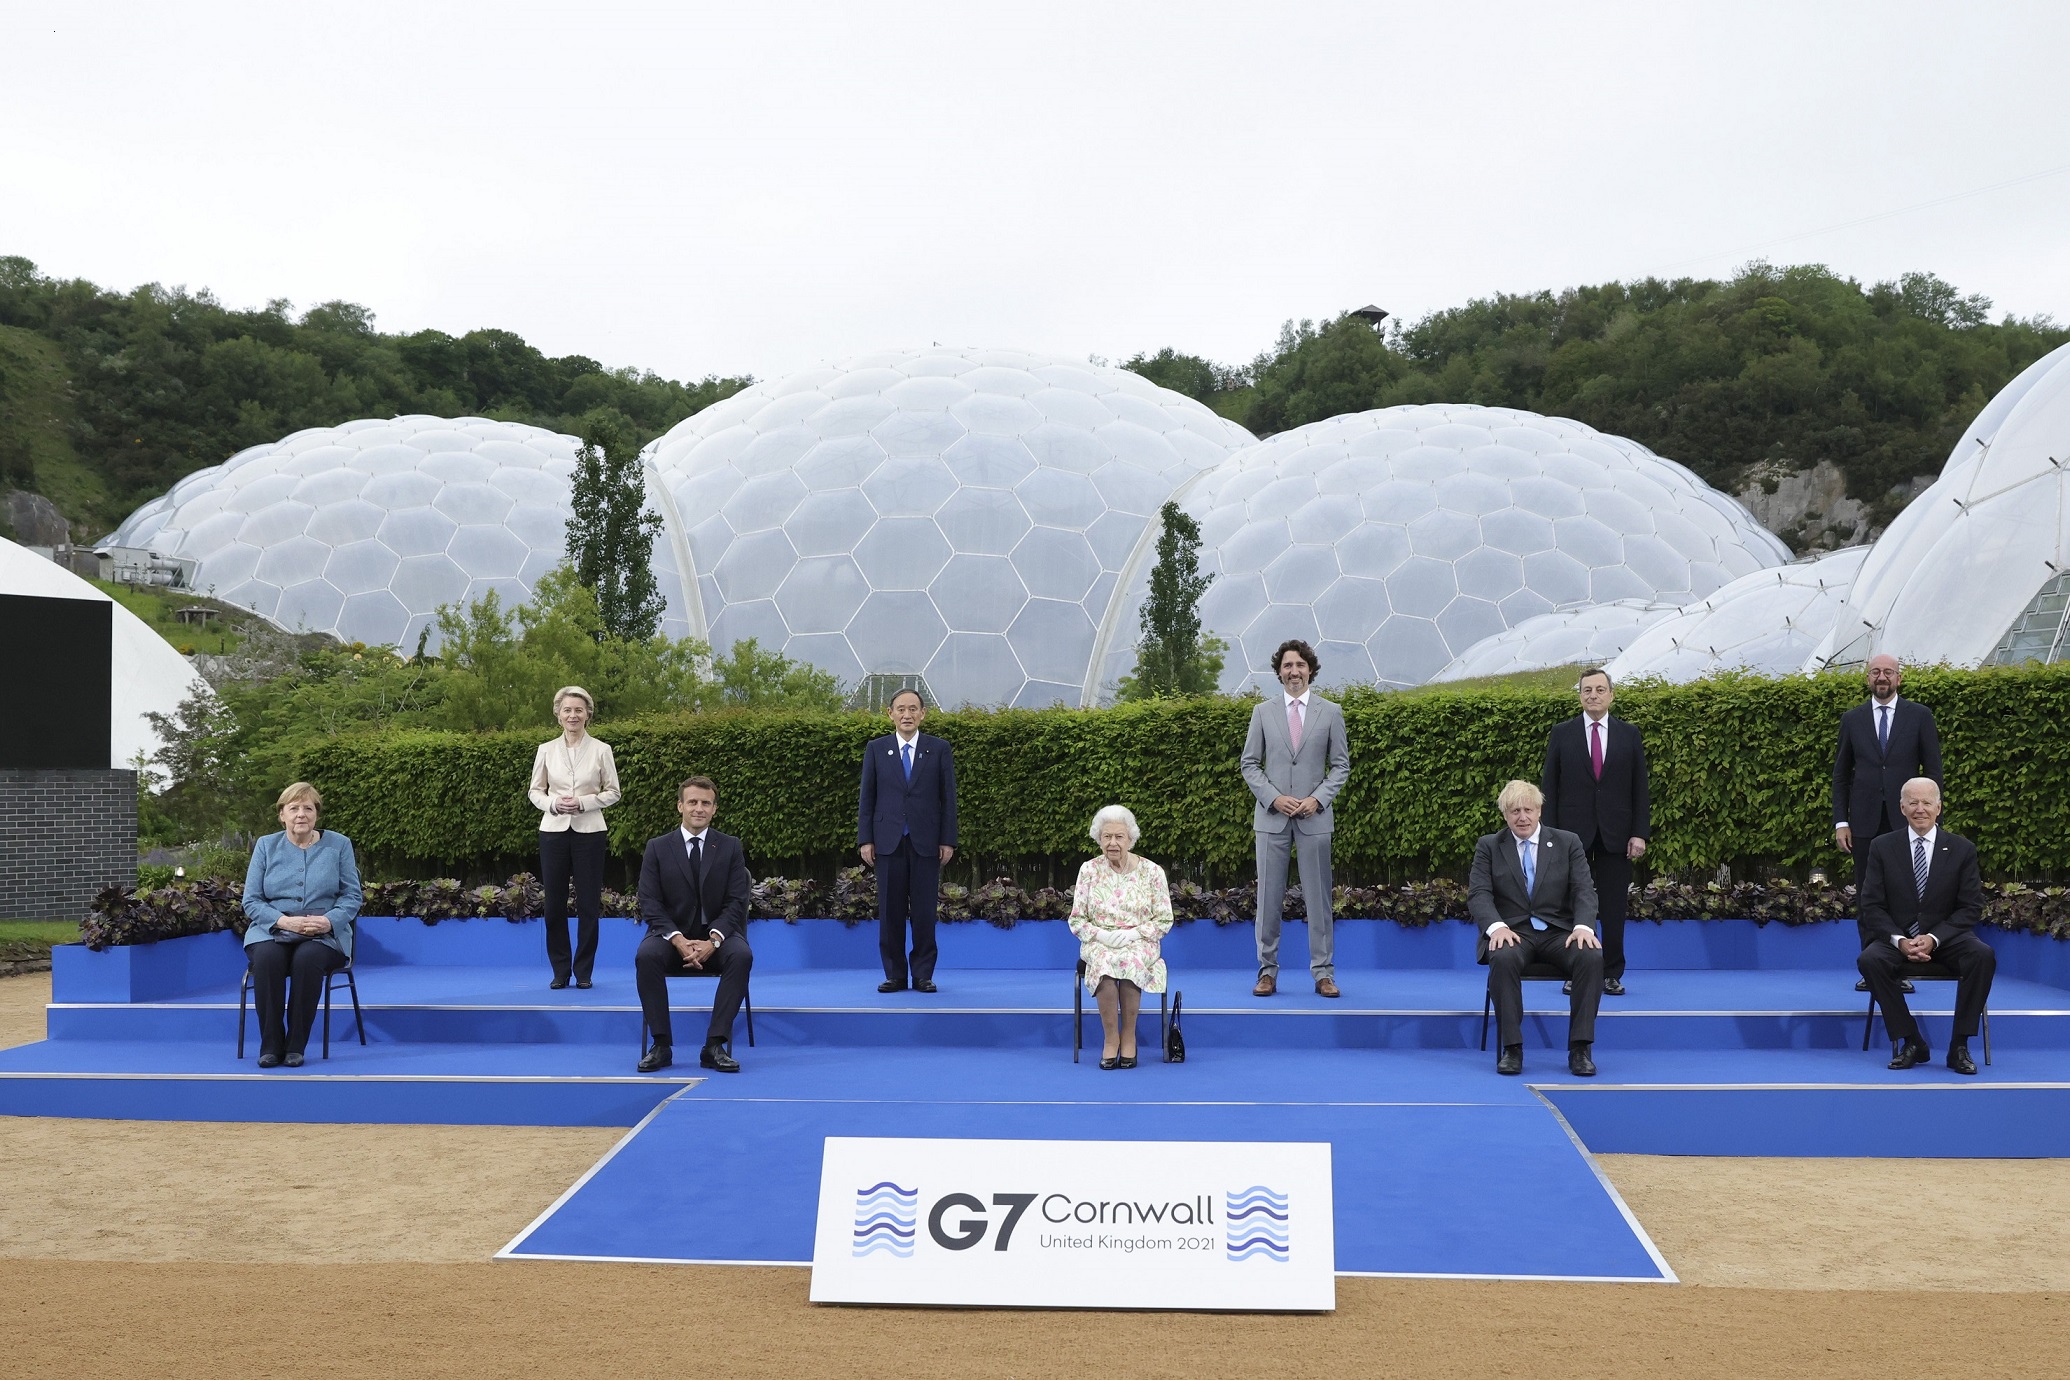 Photograph of the group photograph session with H.M. Queen Elizabeth II and the leaders of the G7 members (Photo courtesy of Number 10)